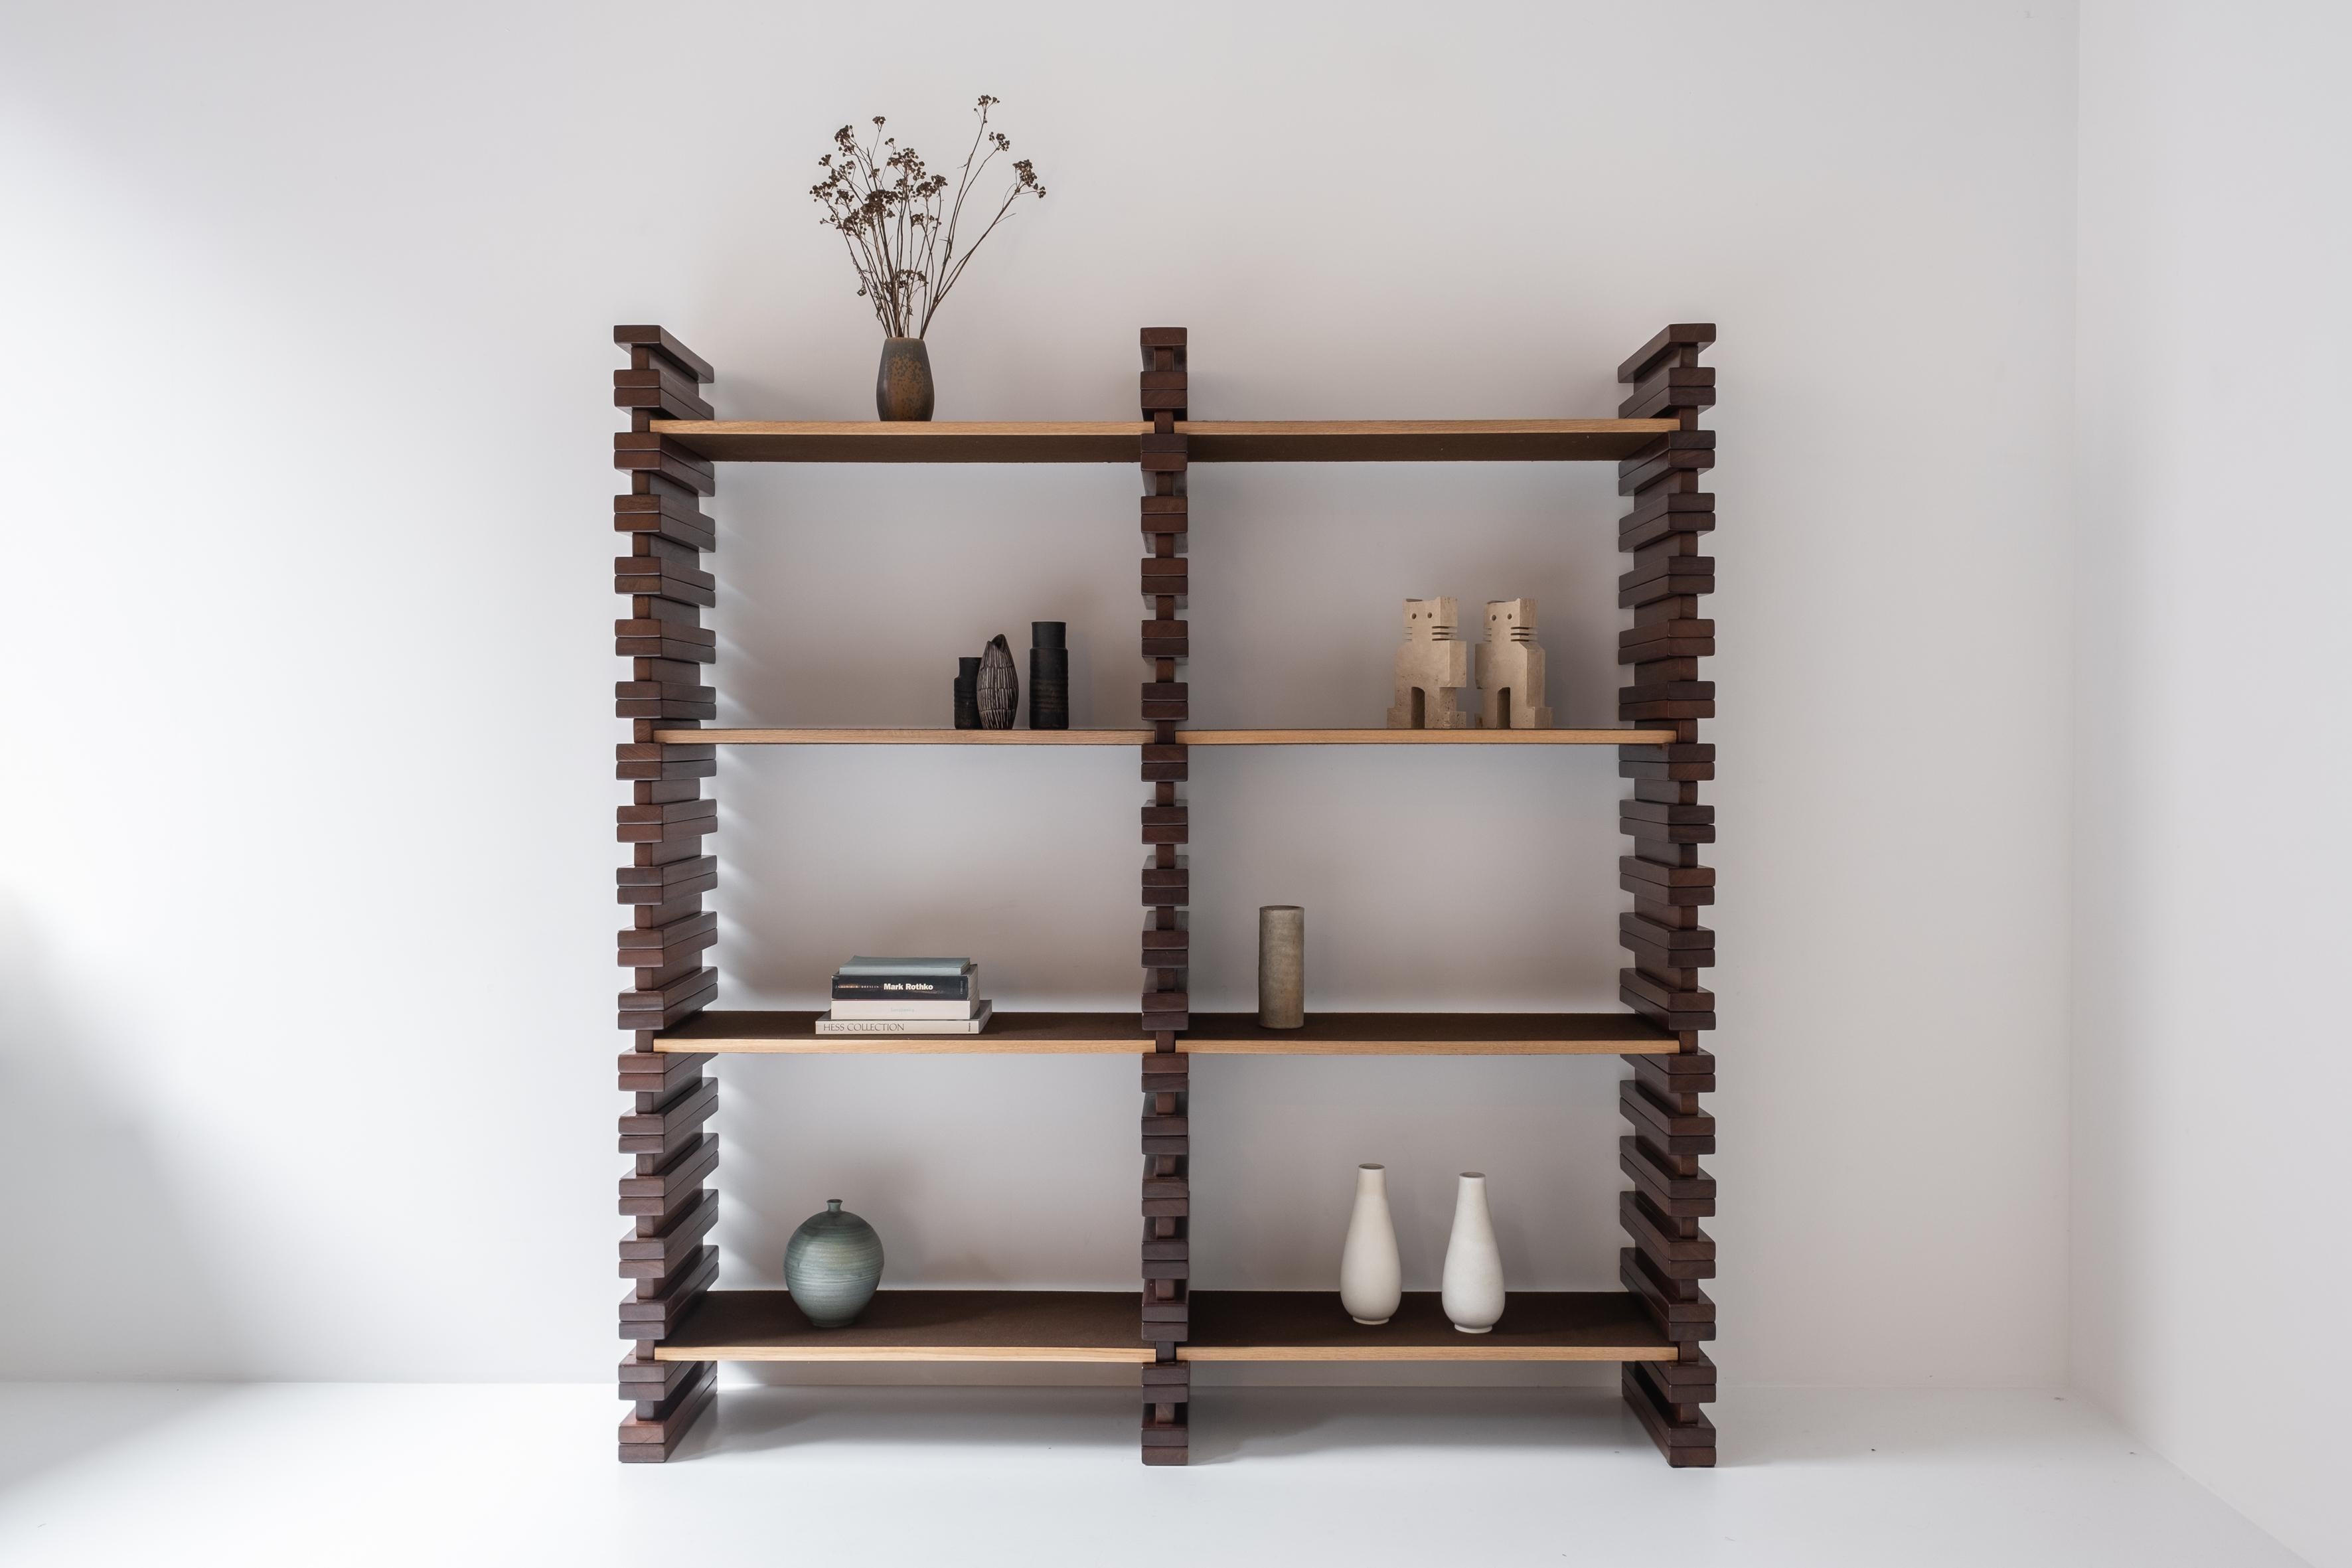 Lovely brutalist open bookshelf from the 1960s. This cabinet features three vertical elements in stained oak with several adjustable shelves. Also included are three extra elements to make the shelf even higher (shown on the last picture). Designer